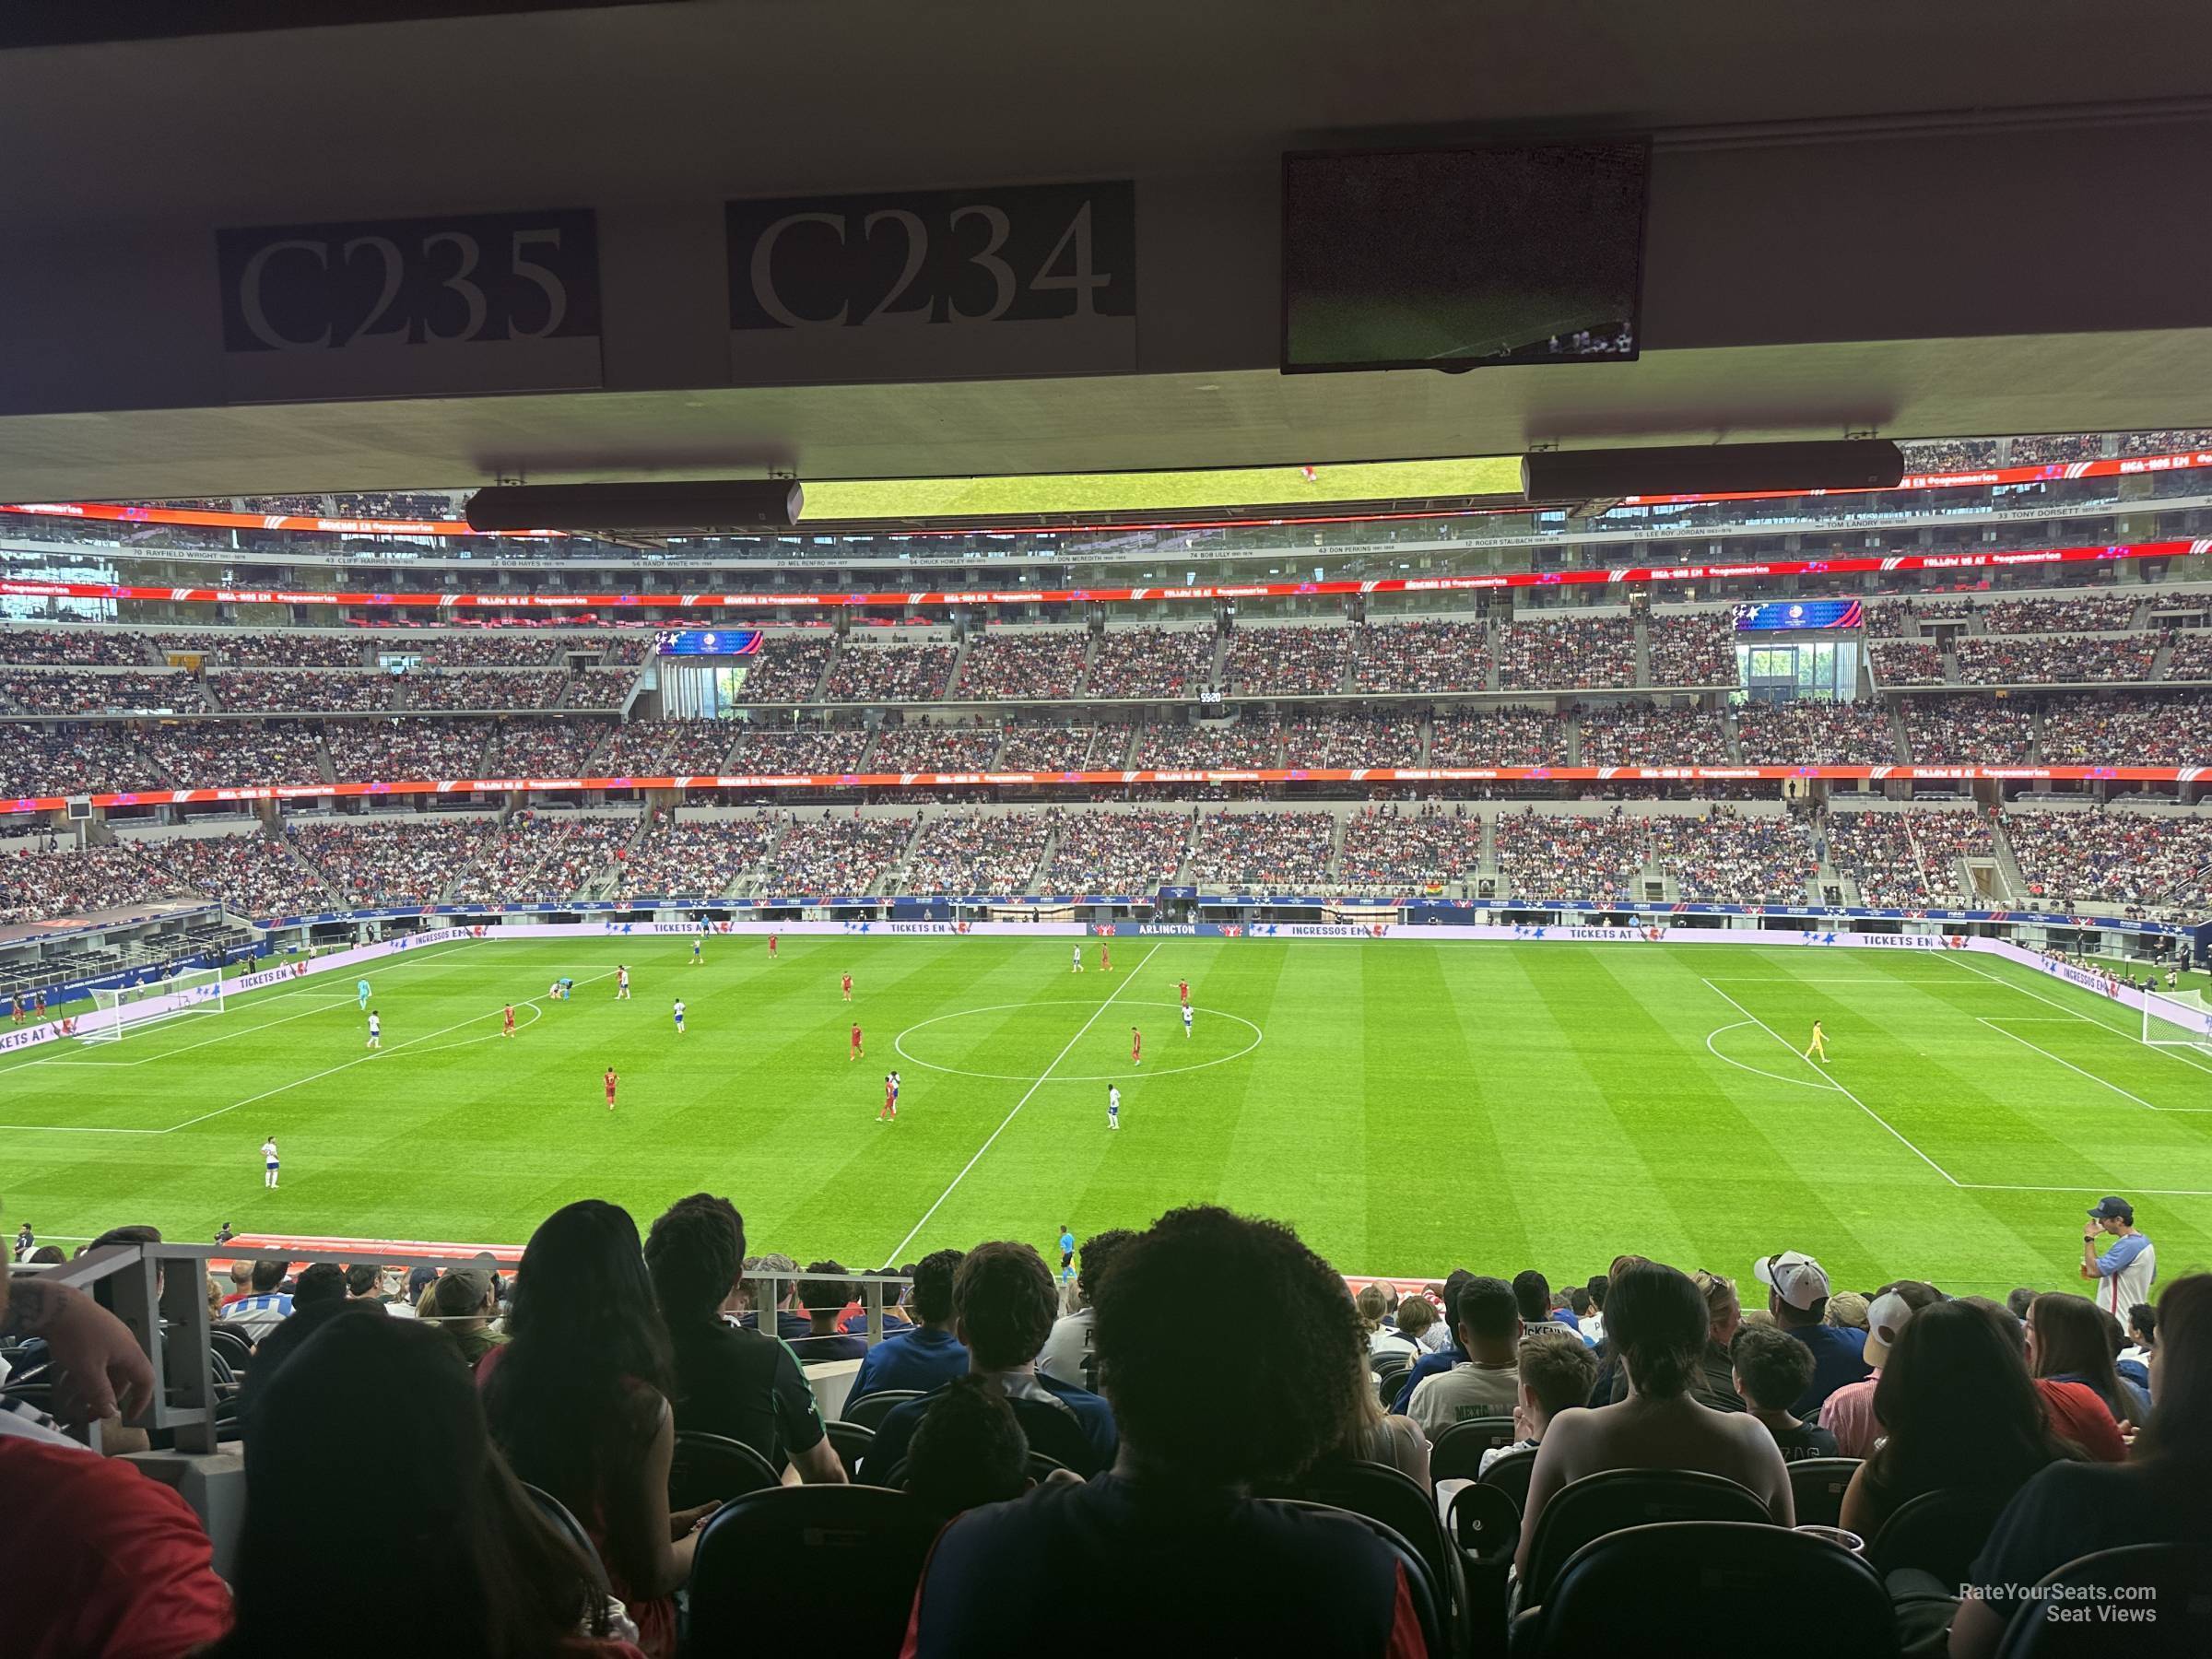 section c234, row 15 seat view  for soccer - at&t stadium (cowboys stadium)